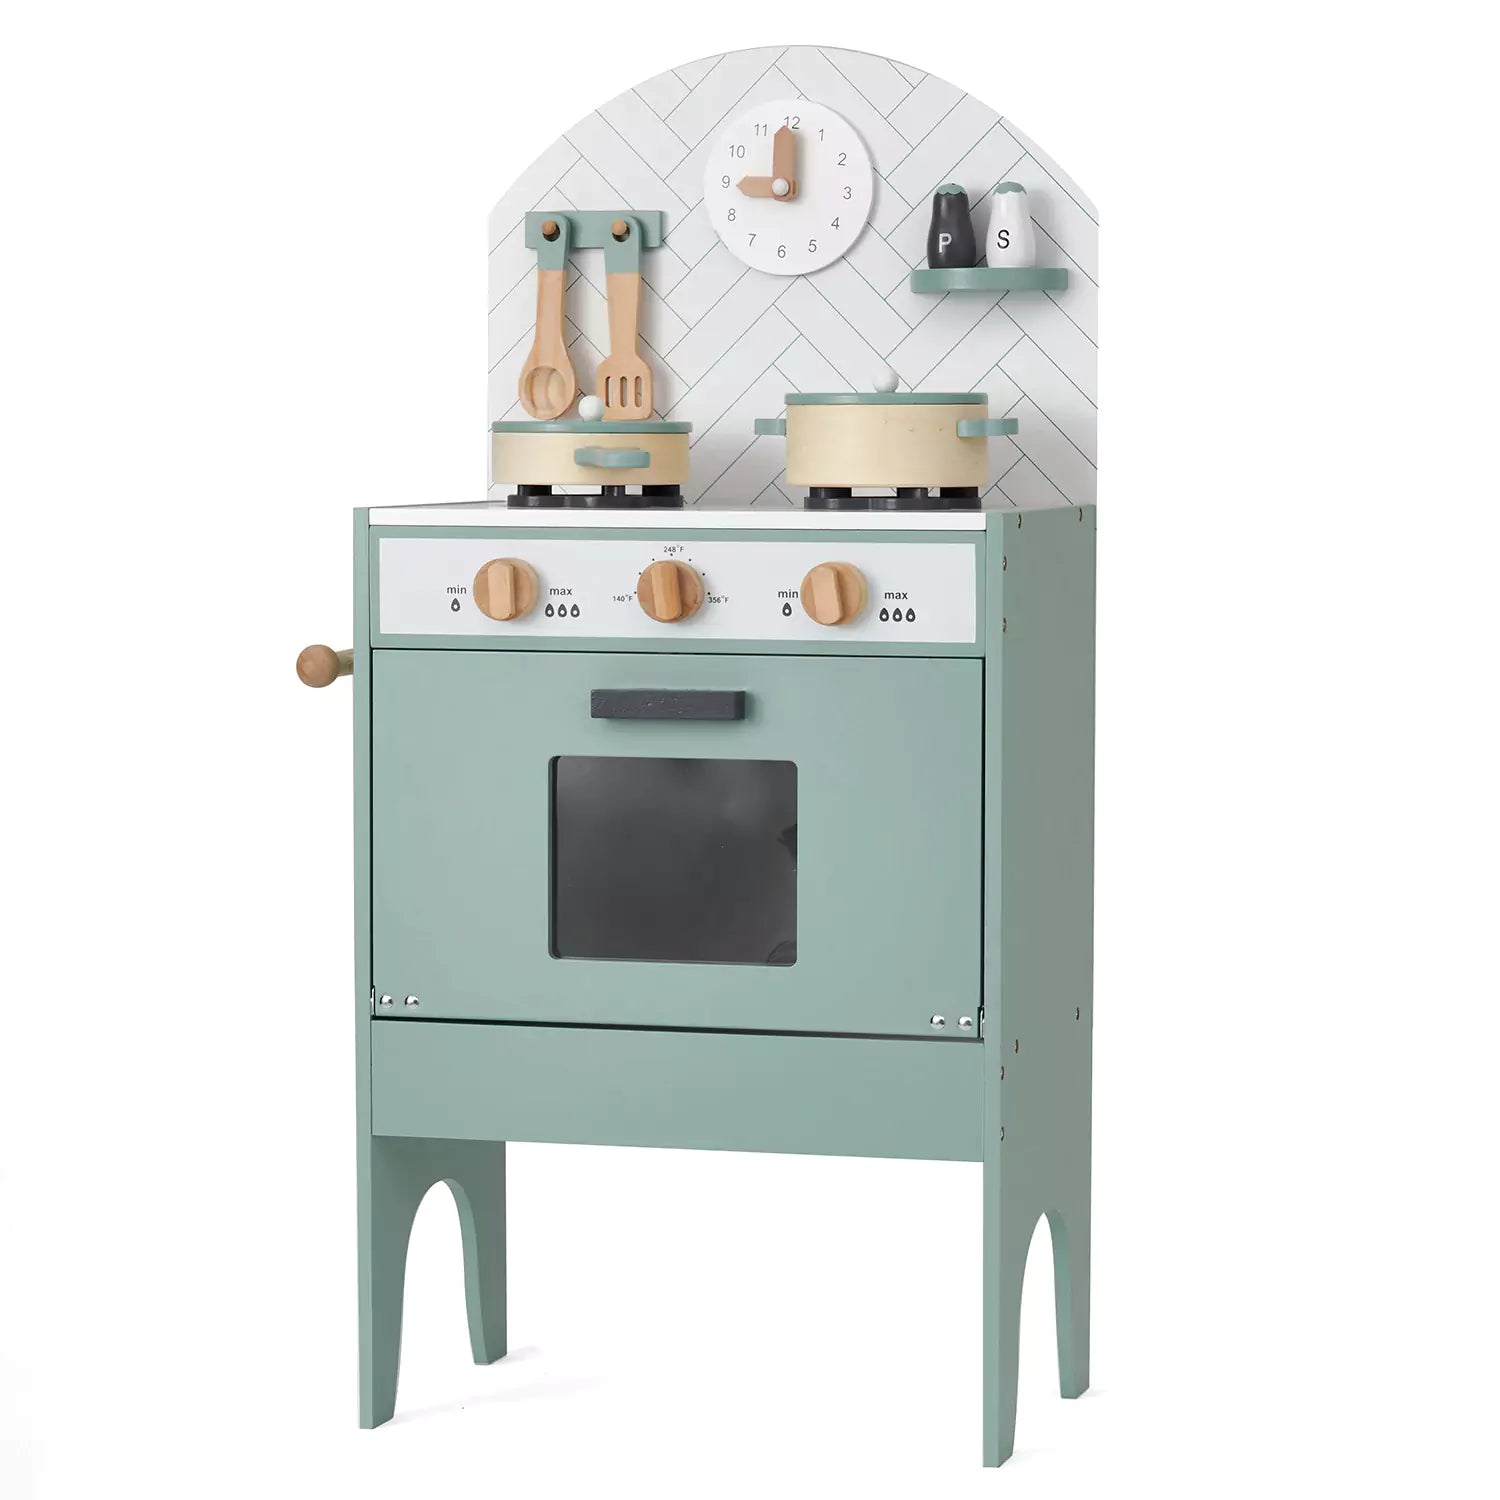 An image of Wooden Toy Kitchen in Mint with 7 Utensils - Award Winning Toys